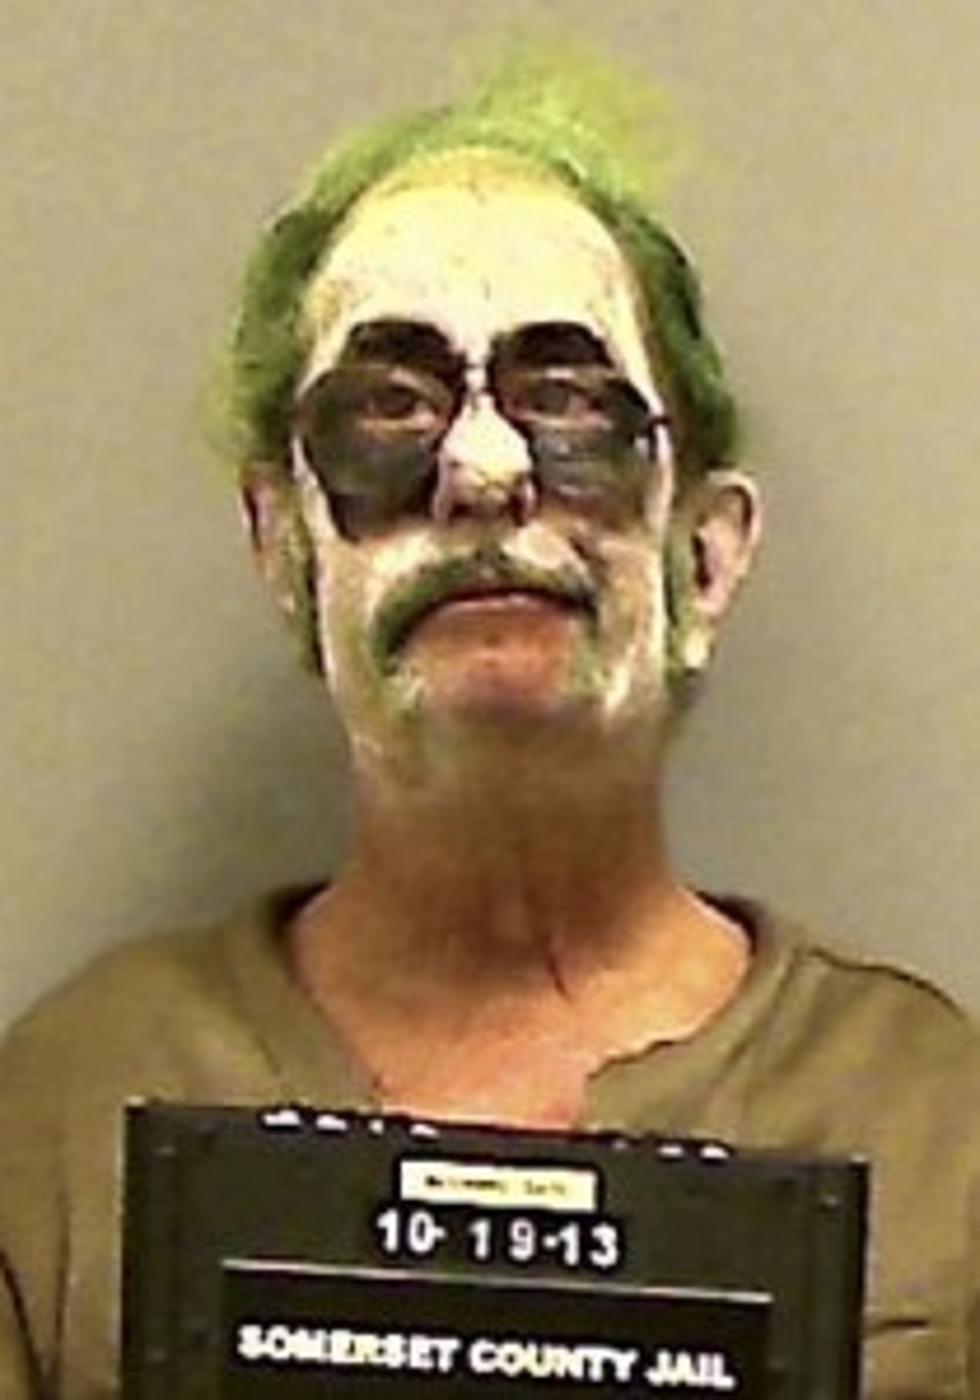 Drunk Driver Dressed As The Joker Takes Hilarious Booking Photo [PHOTO]